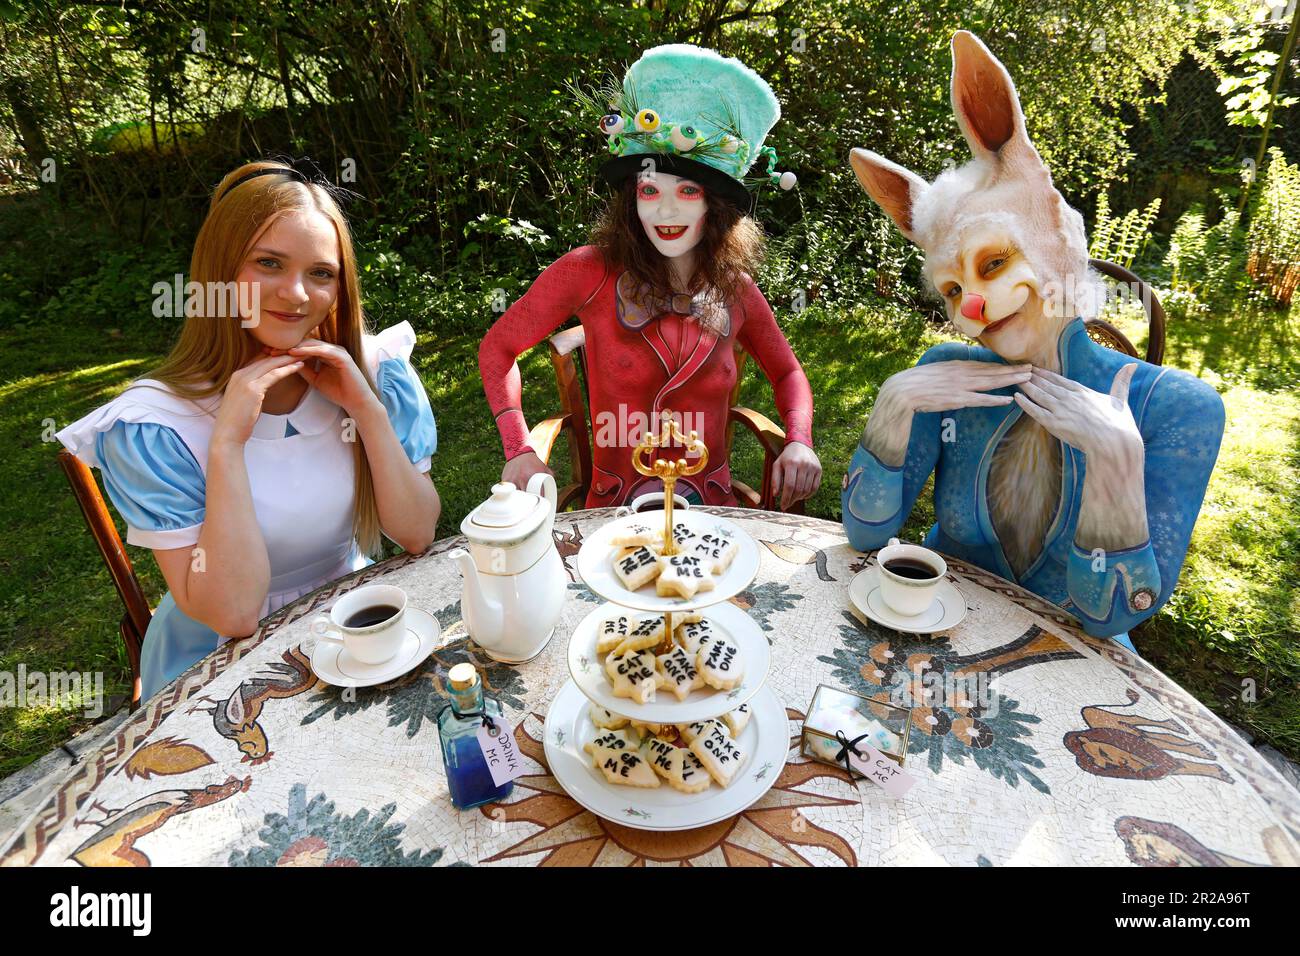 GEEK ART - Bodypainting and Transformaking: Alice in Wonderland photoshooting with Melina as Alice, Julia as the Mad Hatter and Janina as the White Rabbit in the Czarnecki Garden. Hamelin on May 18, 202 - A project by photographer Tschiponnique Skupin and bodypainter Enrico Lein Stock Photo